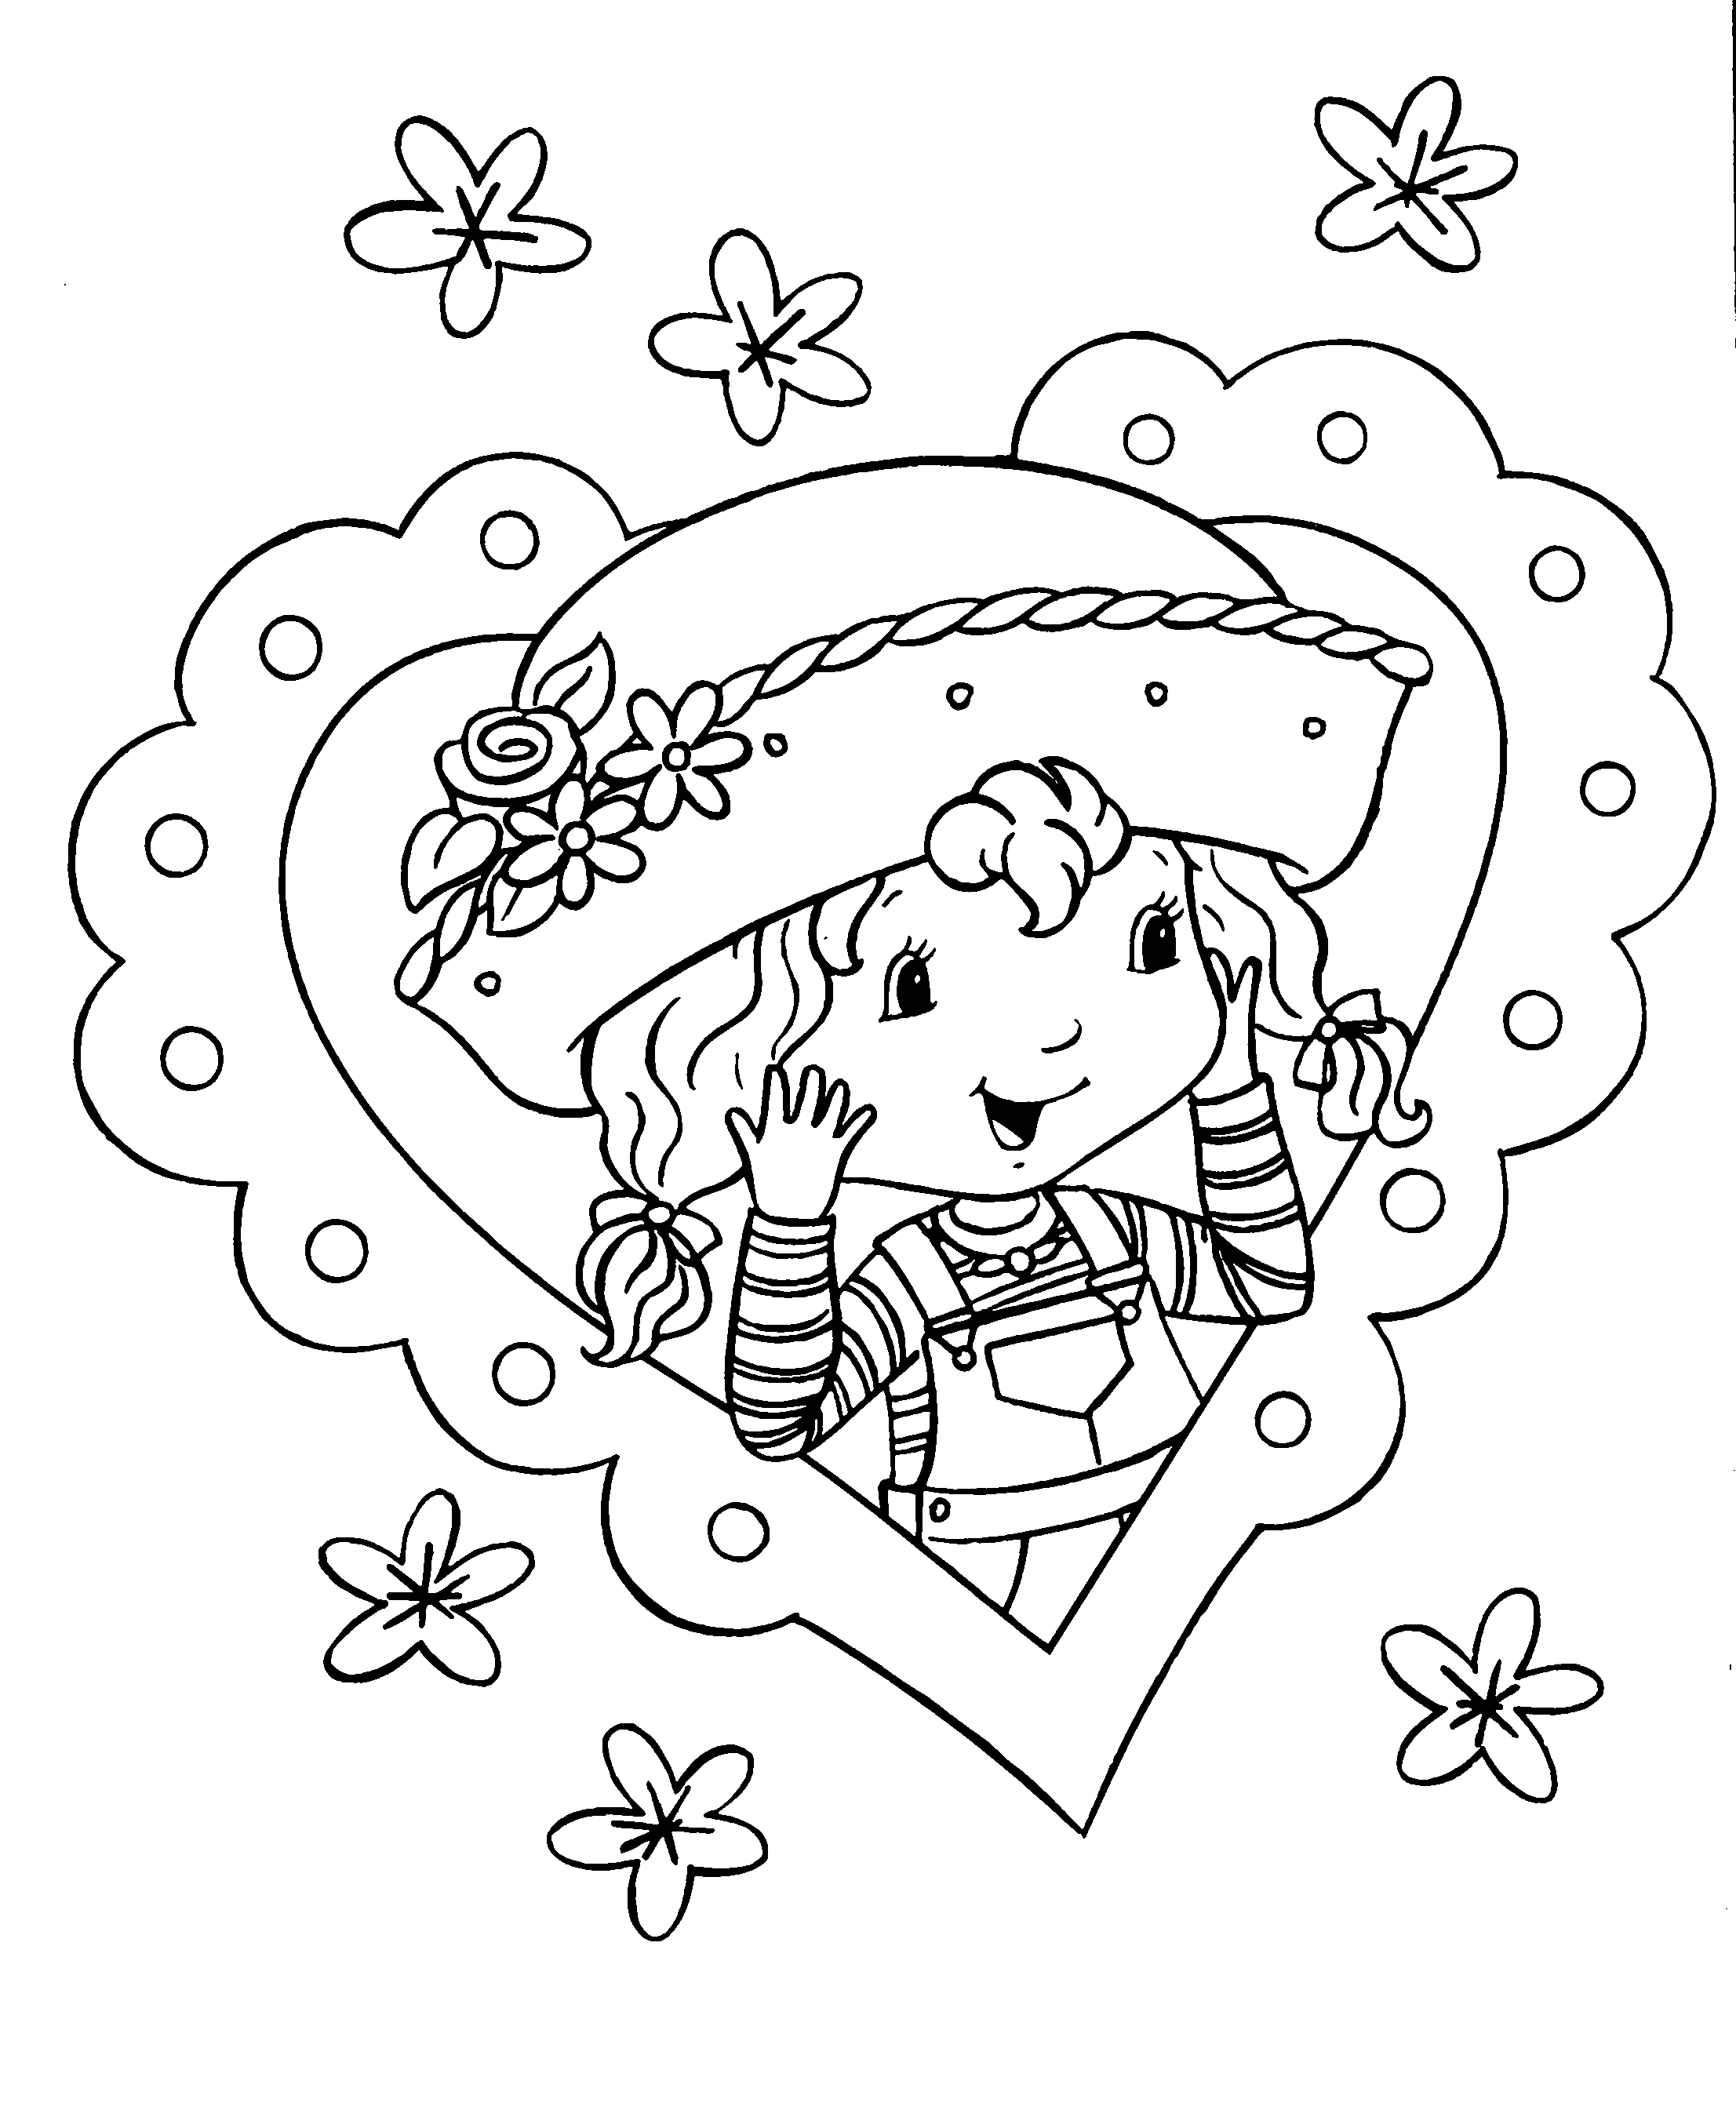 Coloring Pages For Children Strawberry Shortcake 85141 